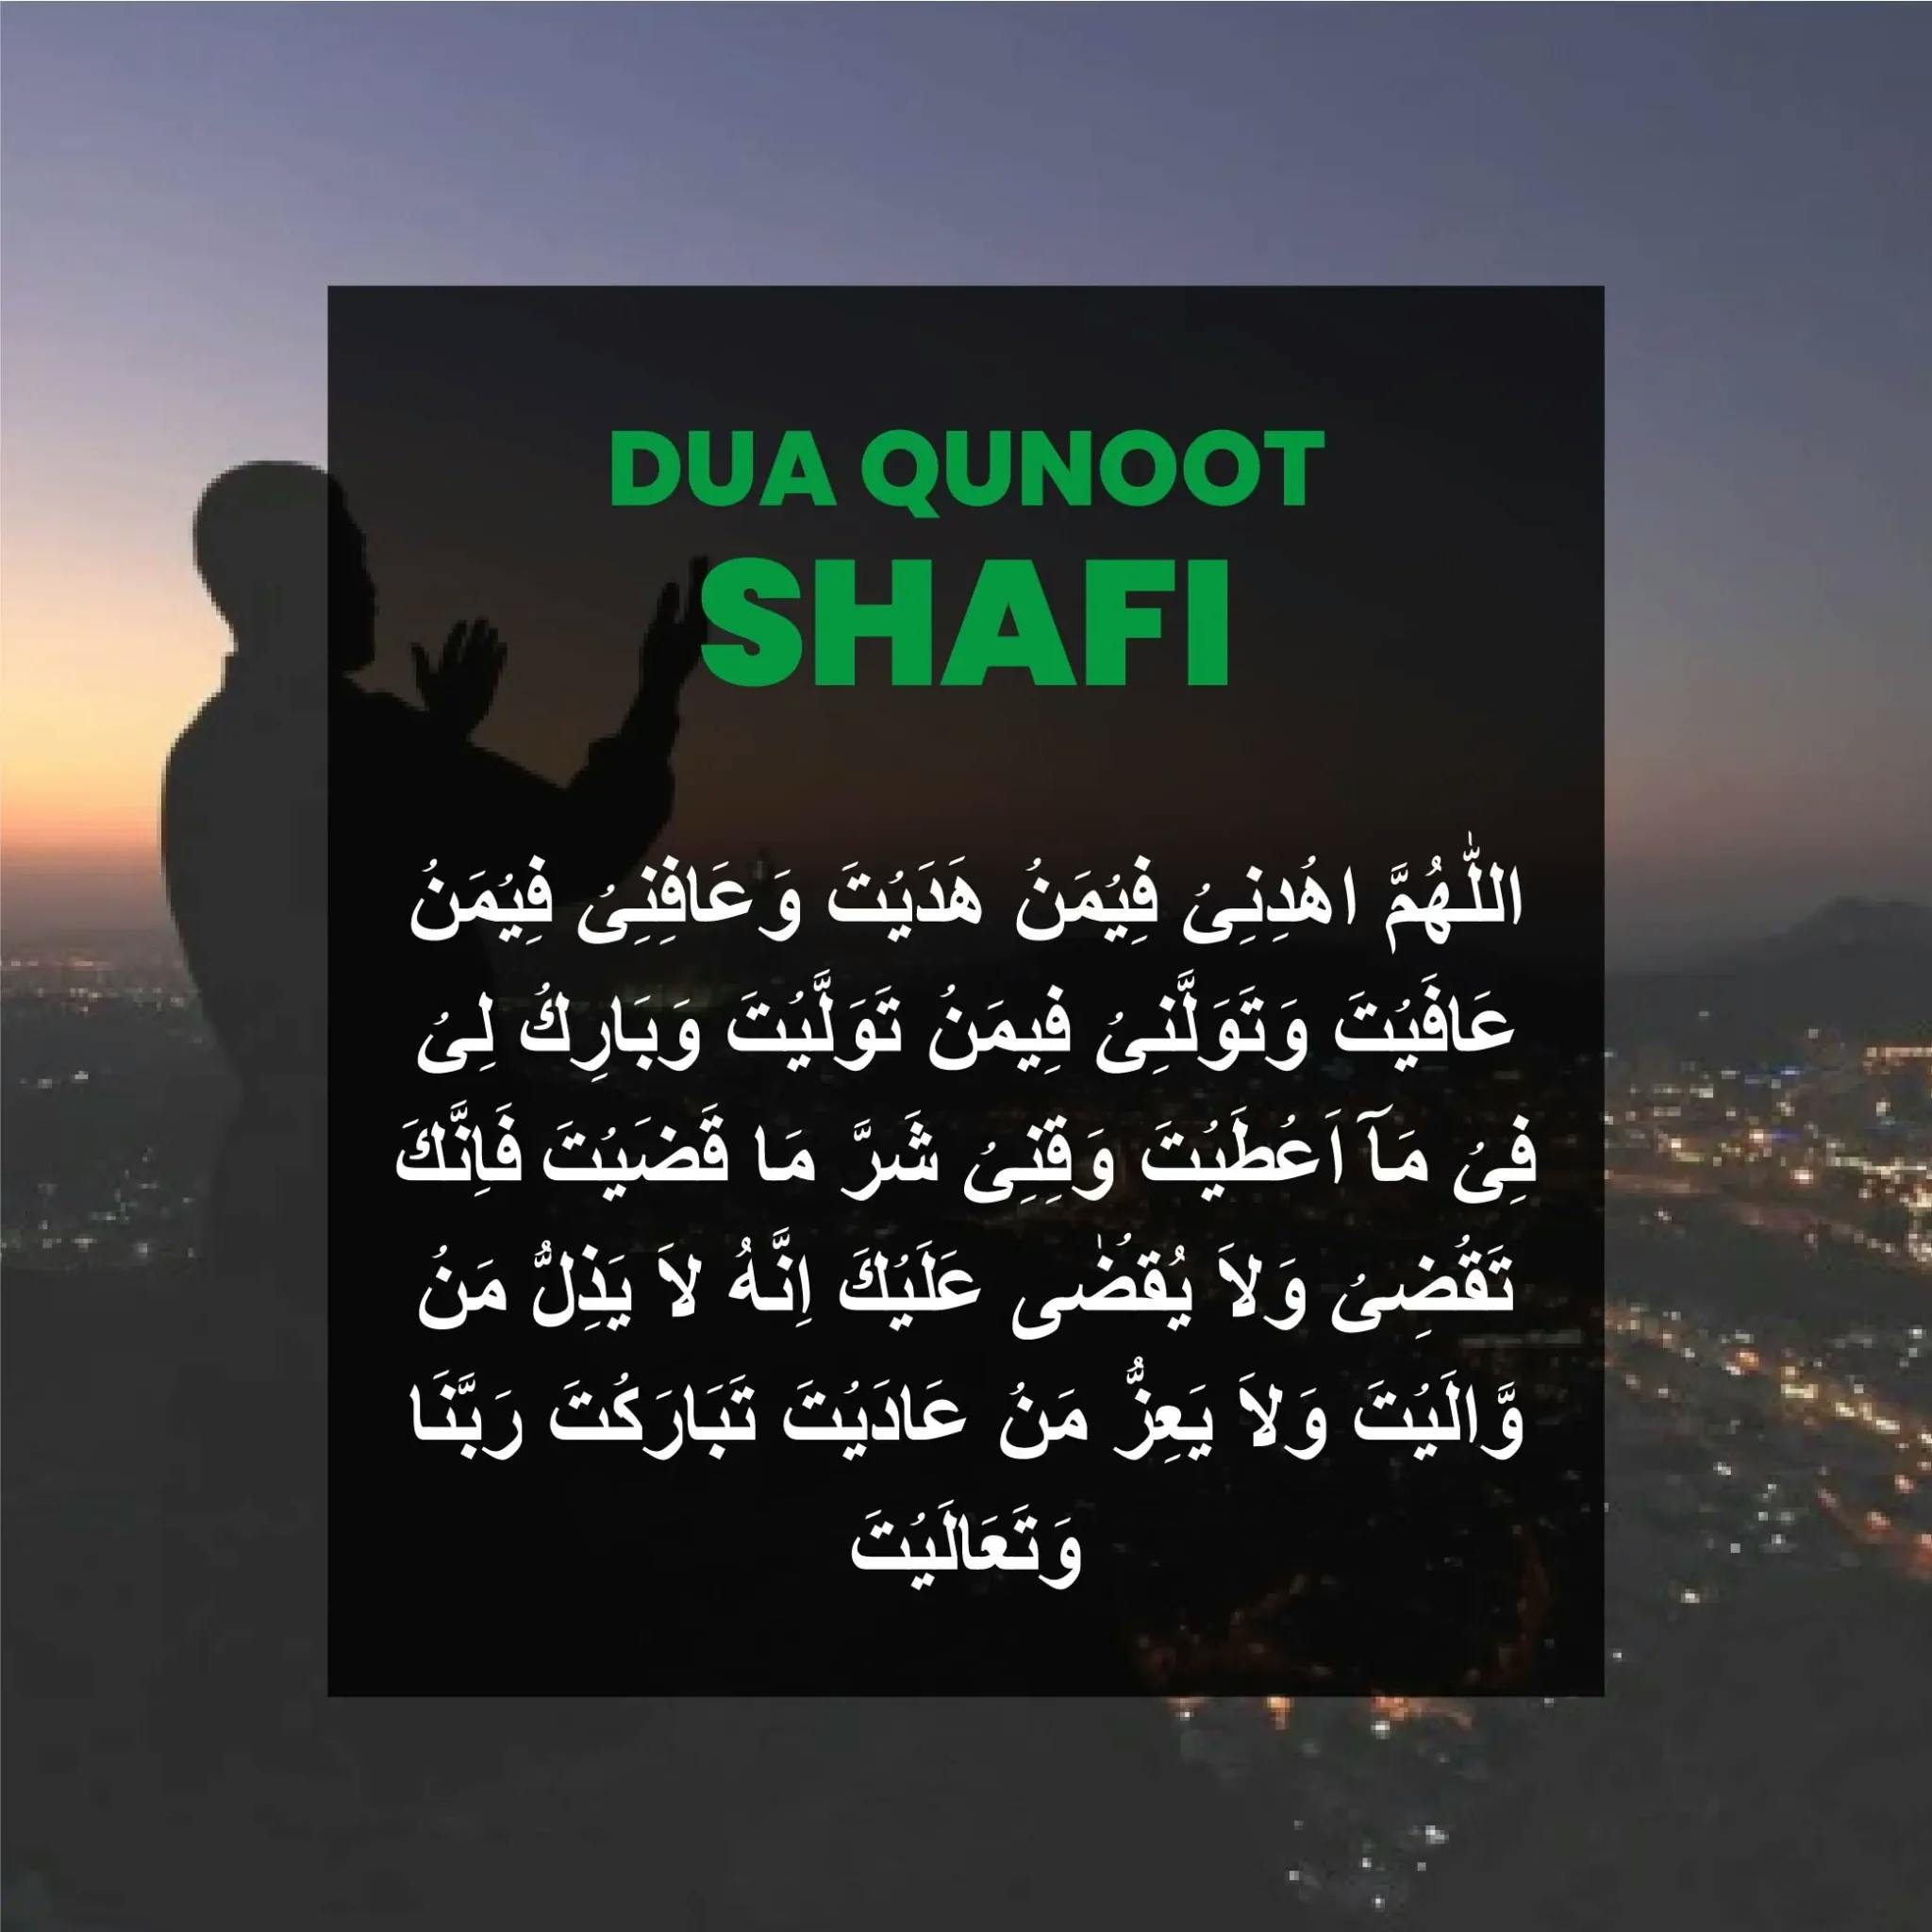 Dua Qunoot Shafi with translation In dua kunoot  we seek the forgiveness and wellbeing in this world and hereafter.